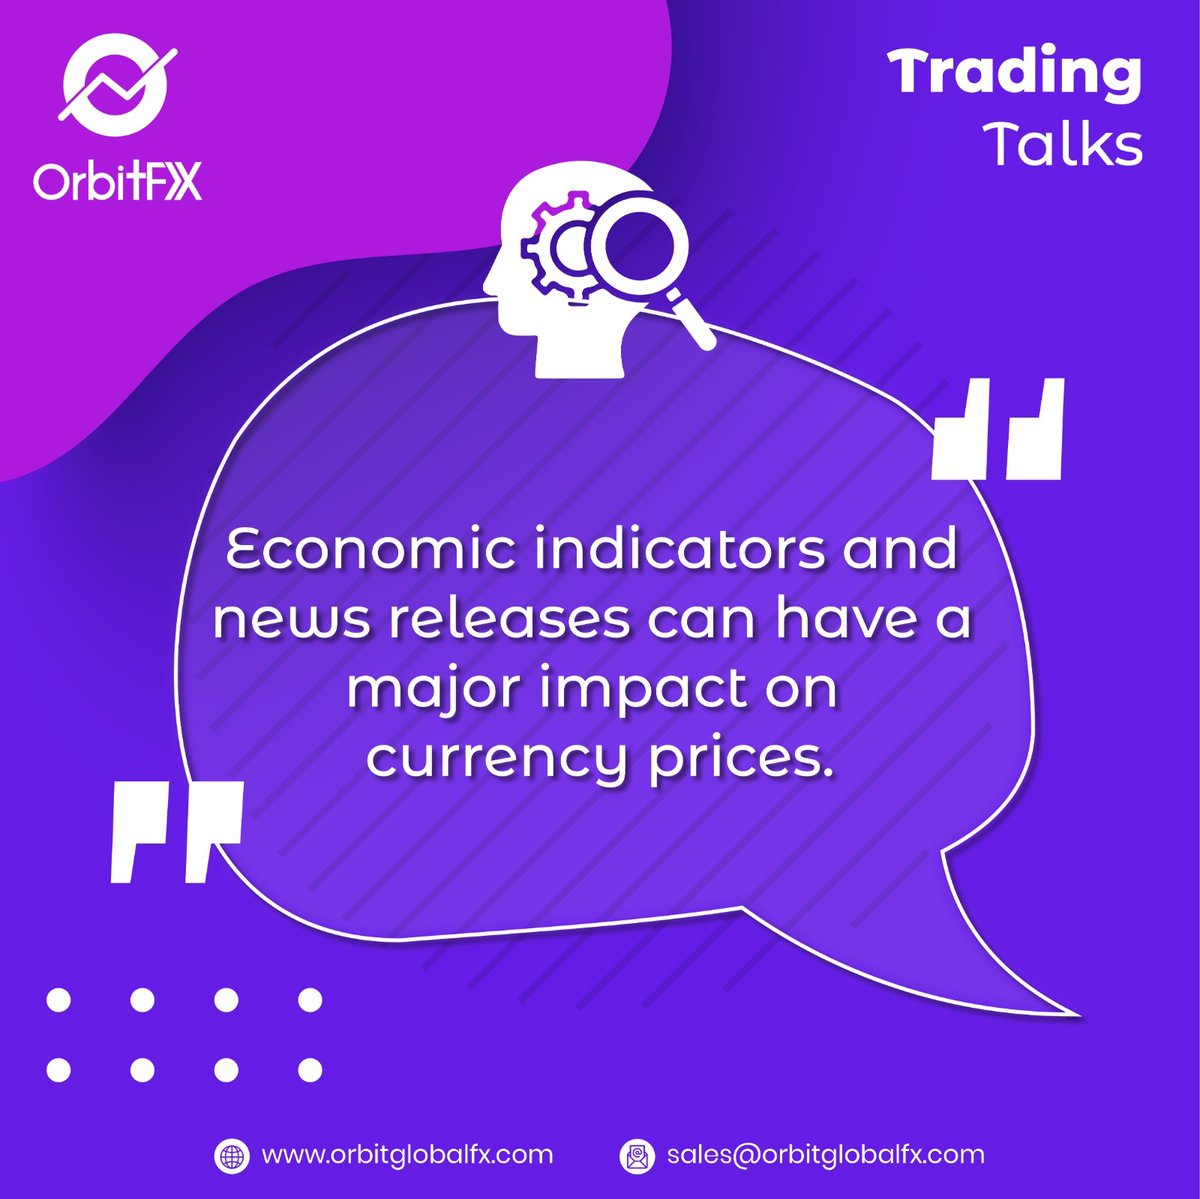 Economic Indicators and News Releases: Understanding Their Impact on Currency Prices
.
.
.
#CurrencyPrices #EconomicIndicators #NewsReleases #MarketVolatility #FinancialMarkets #orbitglobalfx #forextrading #forexsignals #forexlifestyle #invest #forexanalysis #daytradinglife